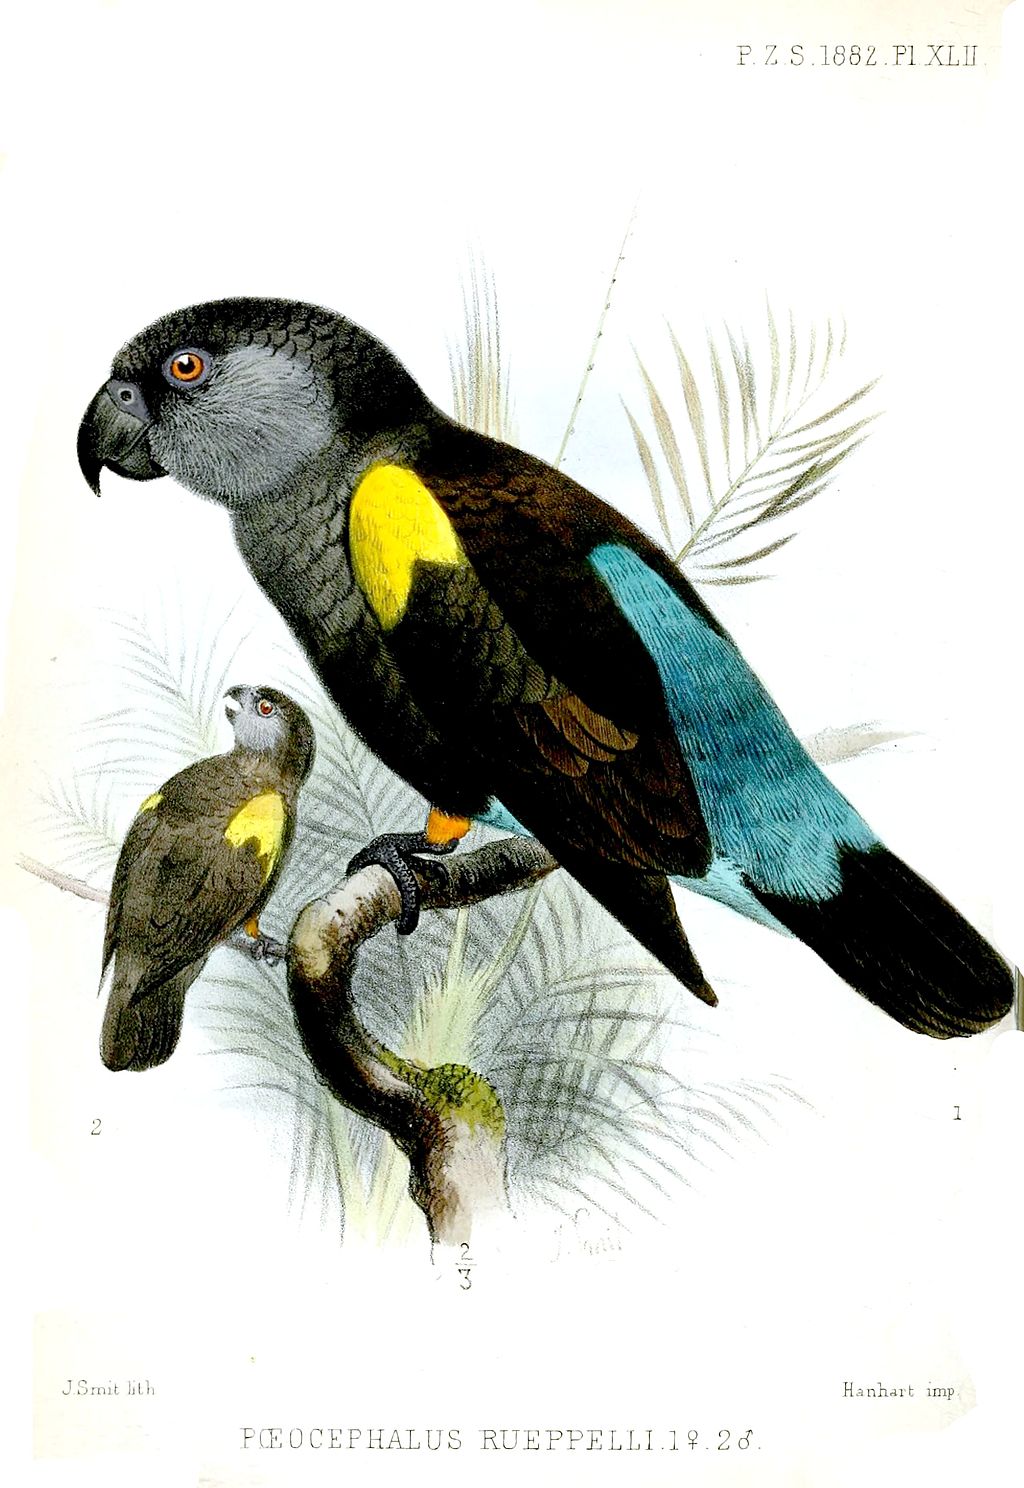 Rüppell's parrot painting by Joseph Smit, a Dutch zoological illustrator (1836-1929)